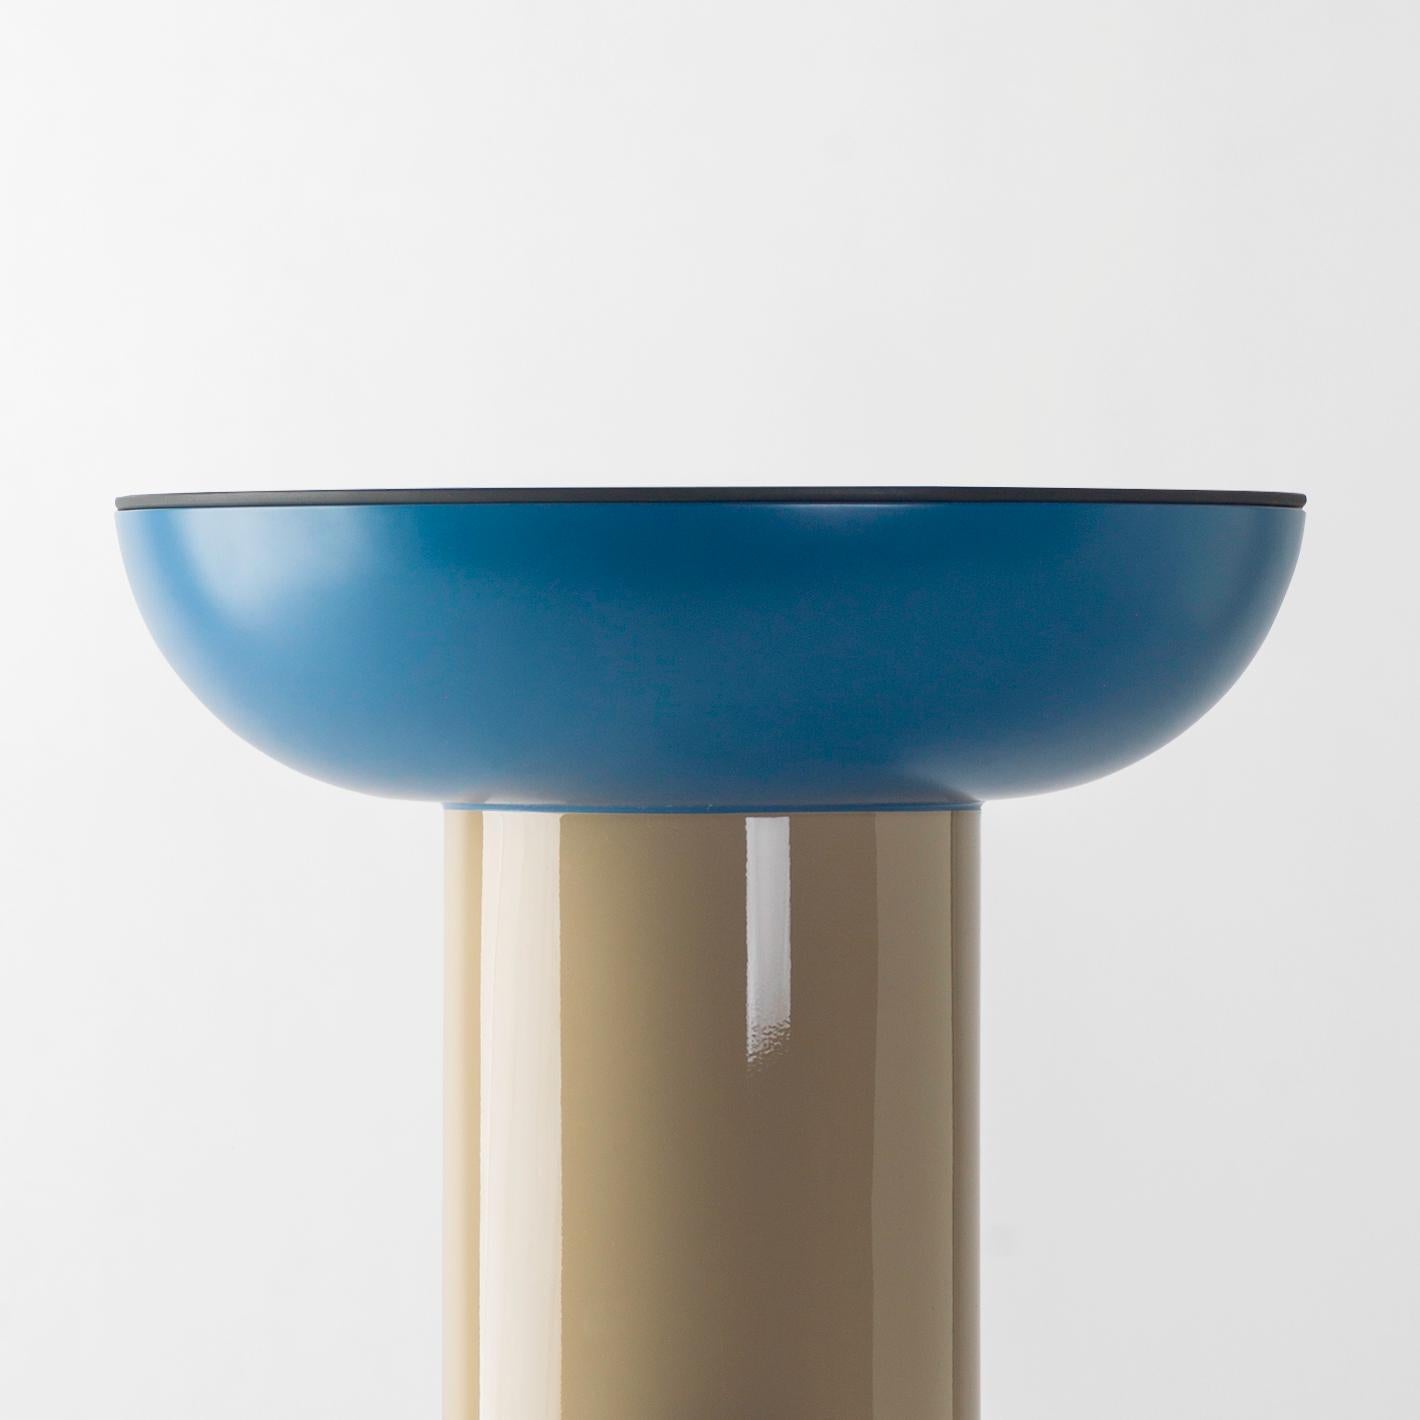 Multicolor explorer #01 table

Design by Jaime Hayon, 2019
Manufactured by BD Barcelona.

Lacquered fibreglass body. Solid turned wooden legs and lacquered. Painted glass table top.

Measures: 40 Ø x 50 cm

- Glass: RAL 7021
- Top: RAL 5007 mate
-